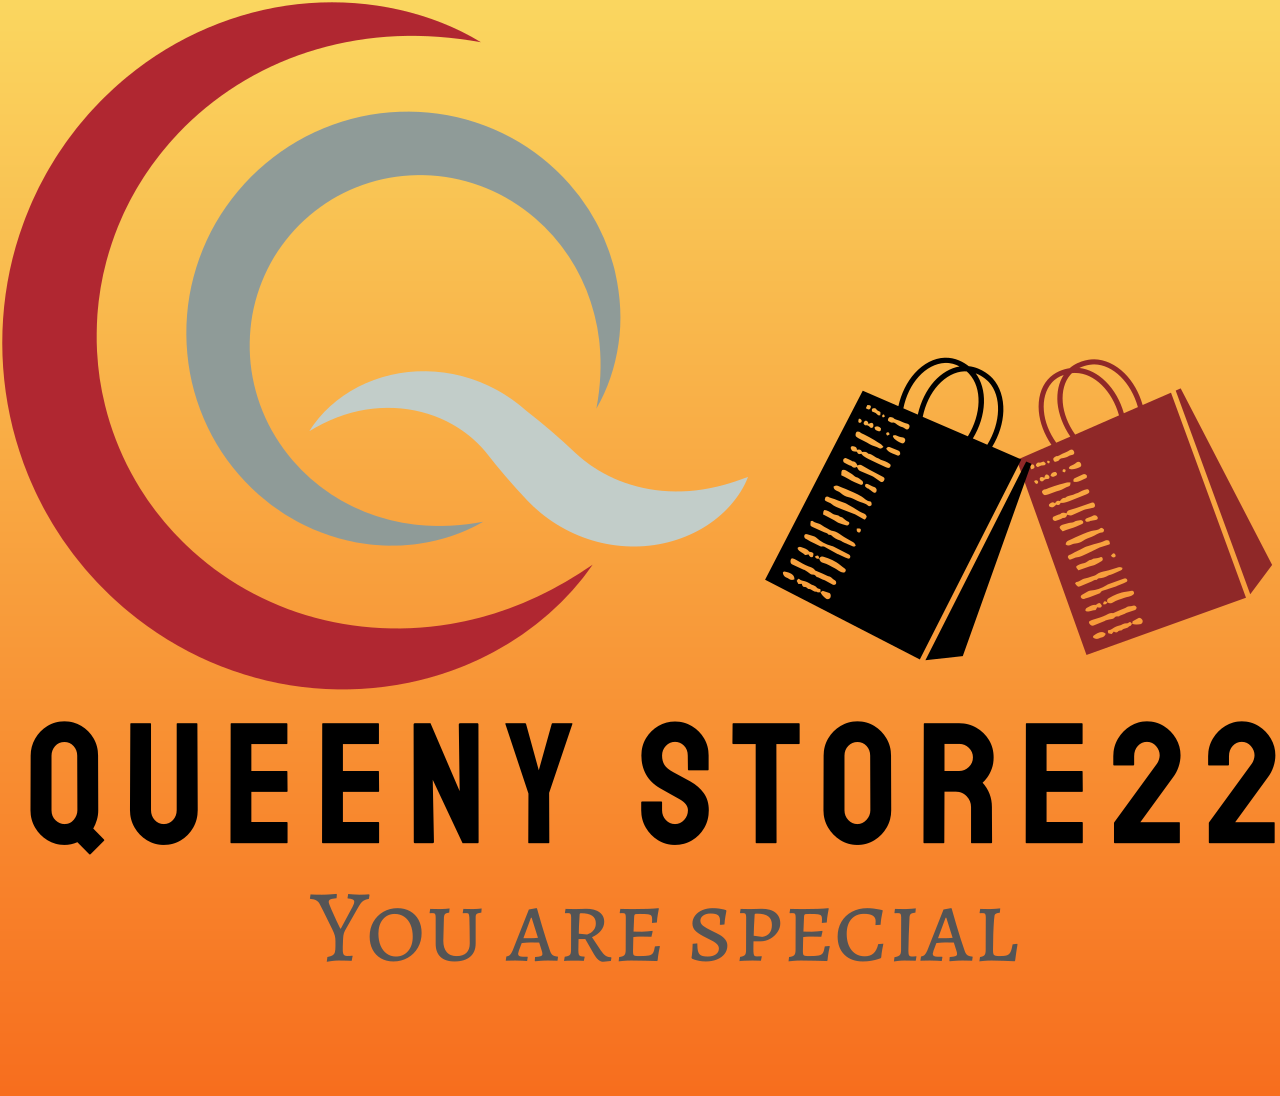 Queeny Store22 's web page